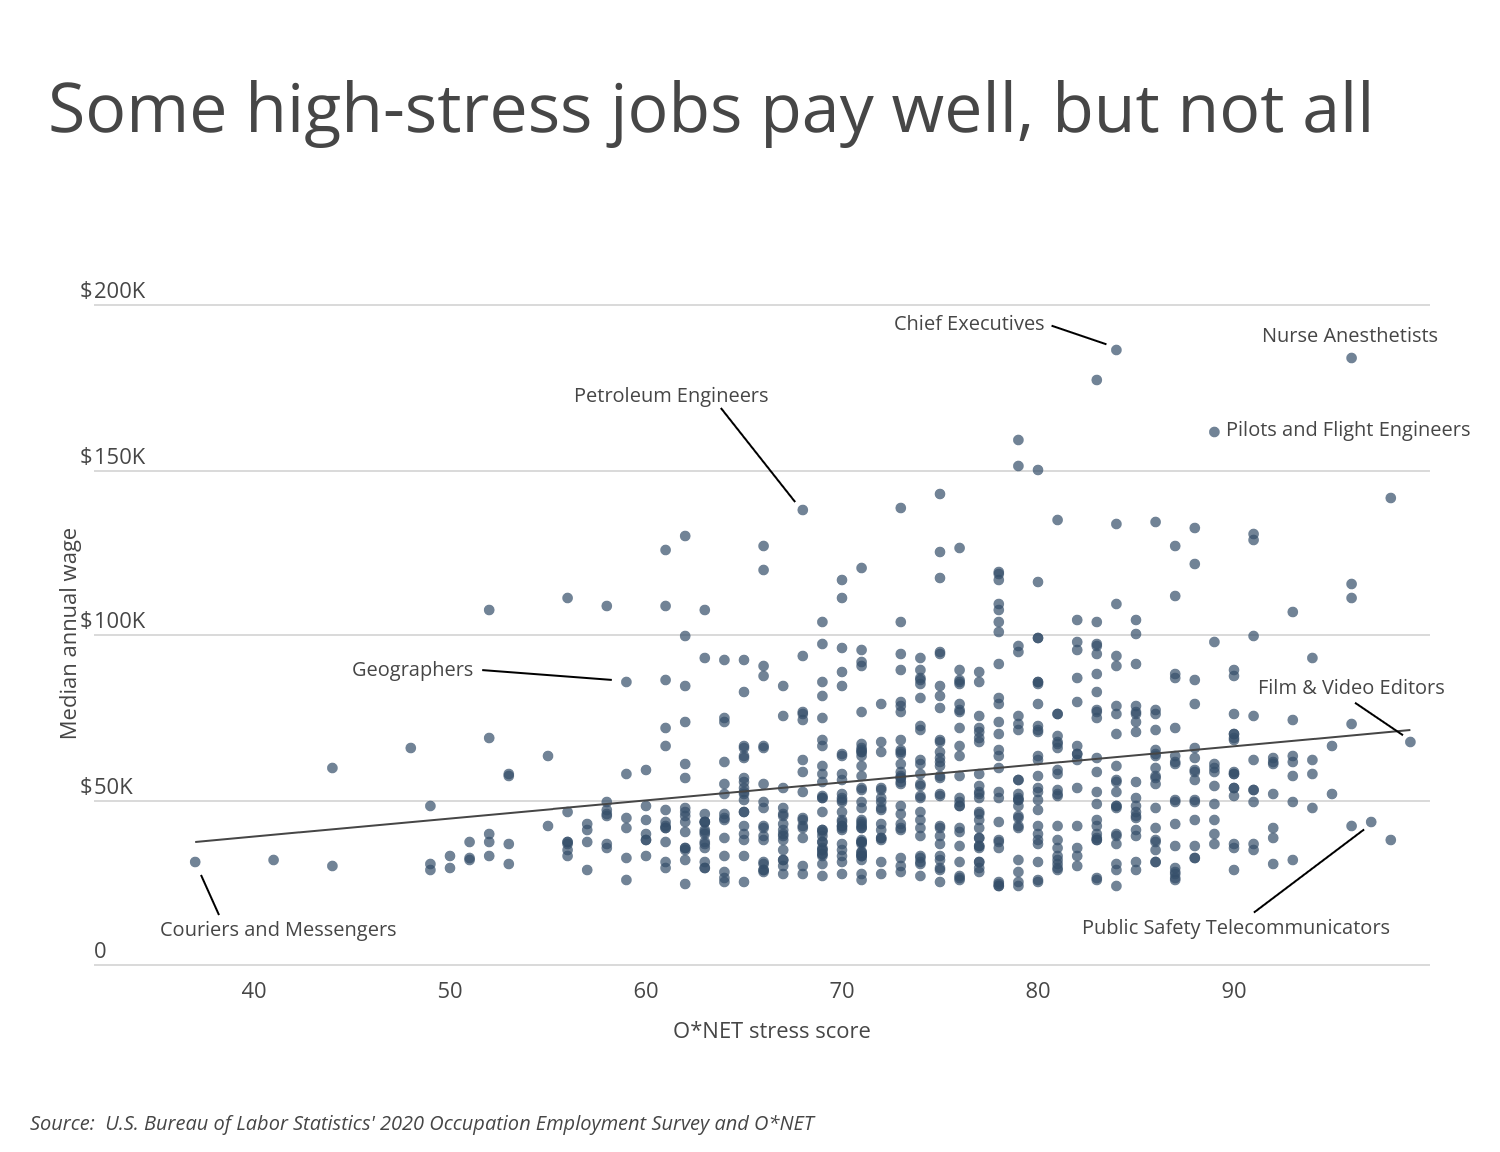 Chart1_Some high-stress jobs pay well, but not all